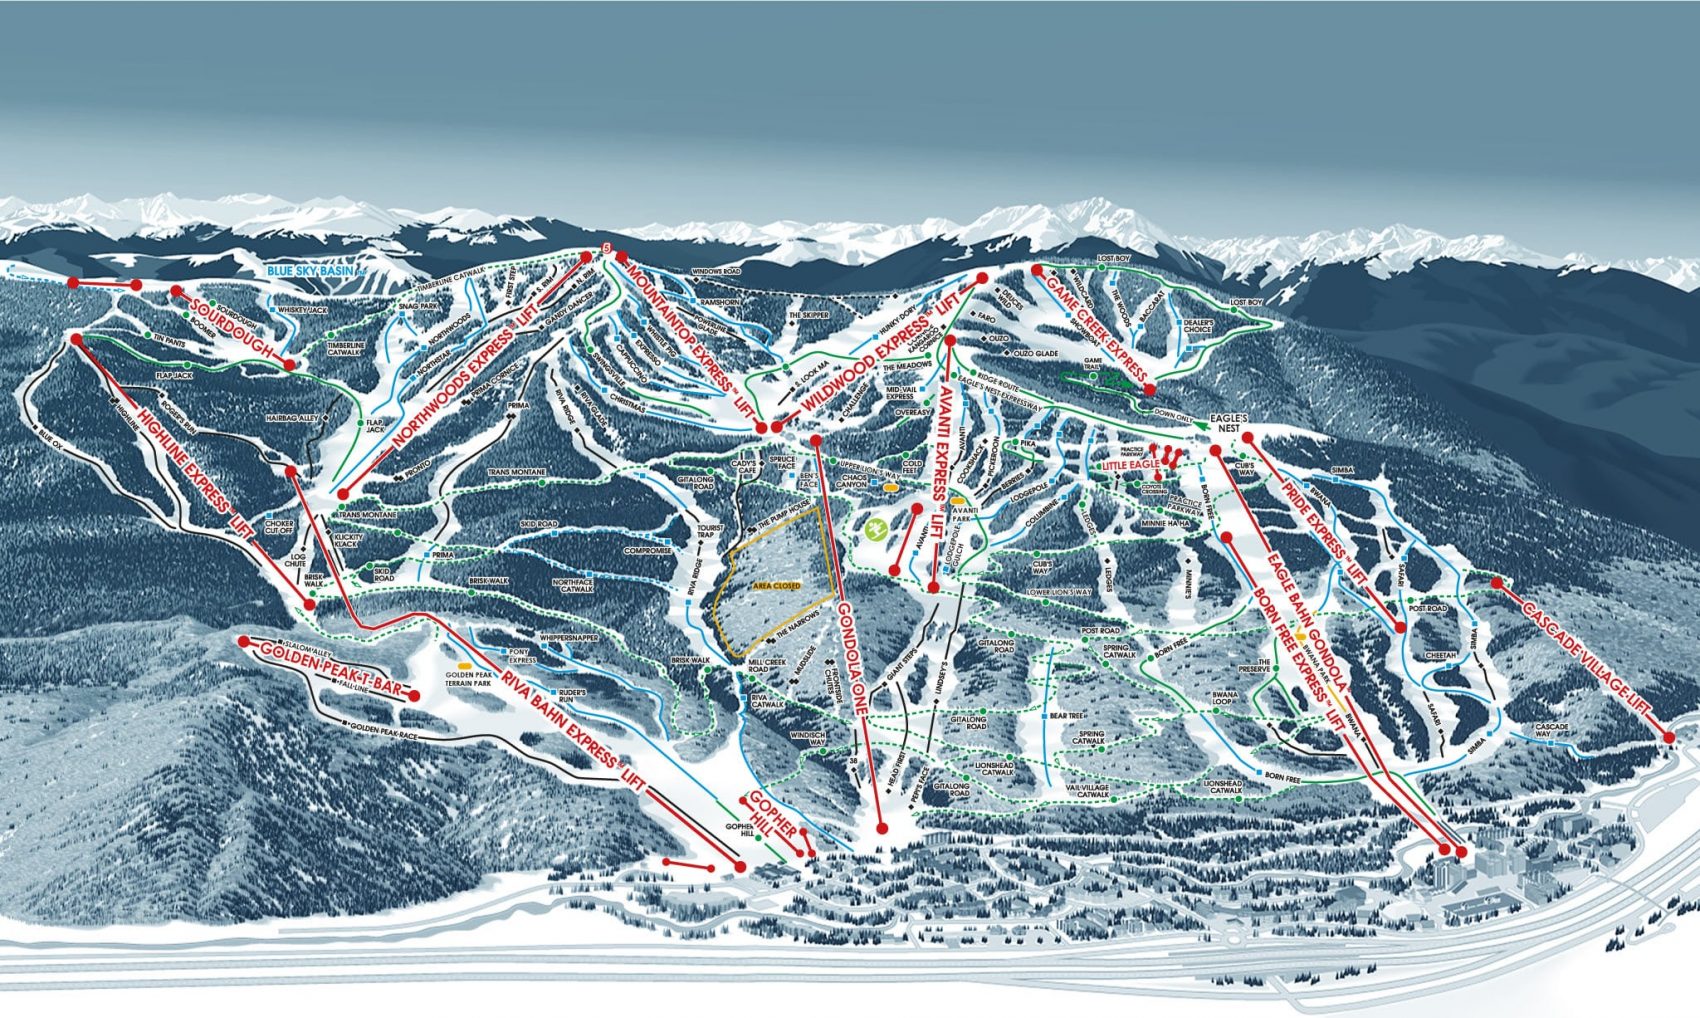 Trail Map Of Vail Colorado